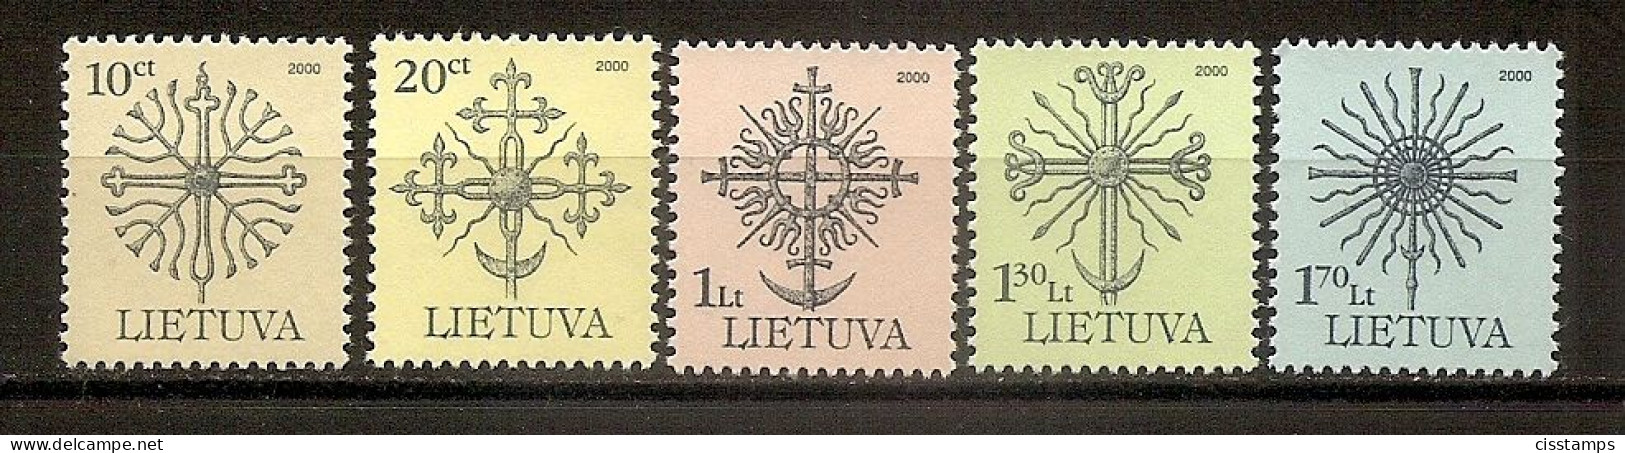 LITHUANIA 2000●Definitive●Forged Tops Of Monuments●Perf.13 3/4x 13 1/4●Size 22x26●Mi 717AI-21AI●MNH - Lithuania